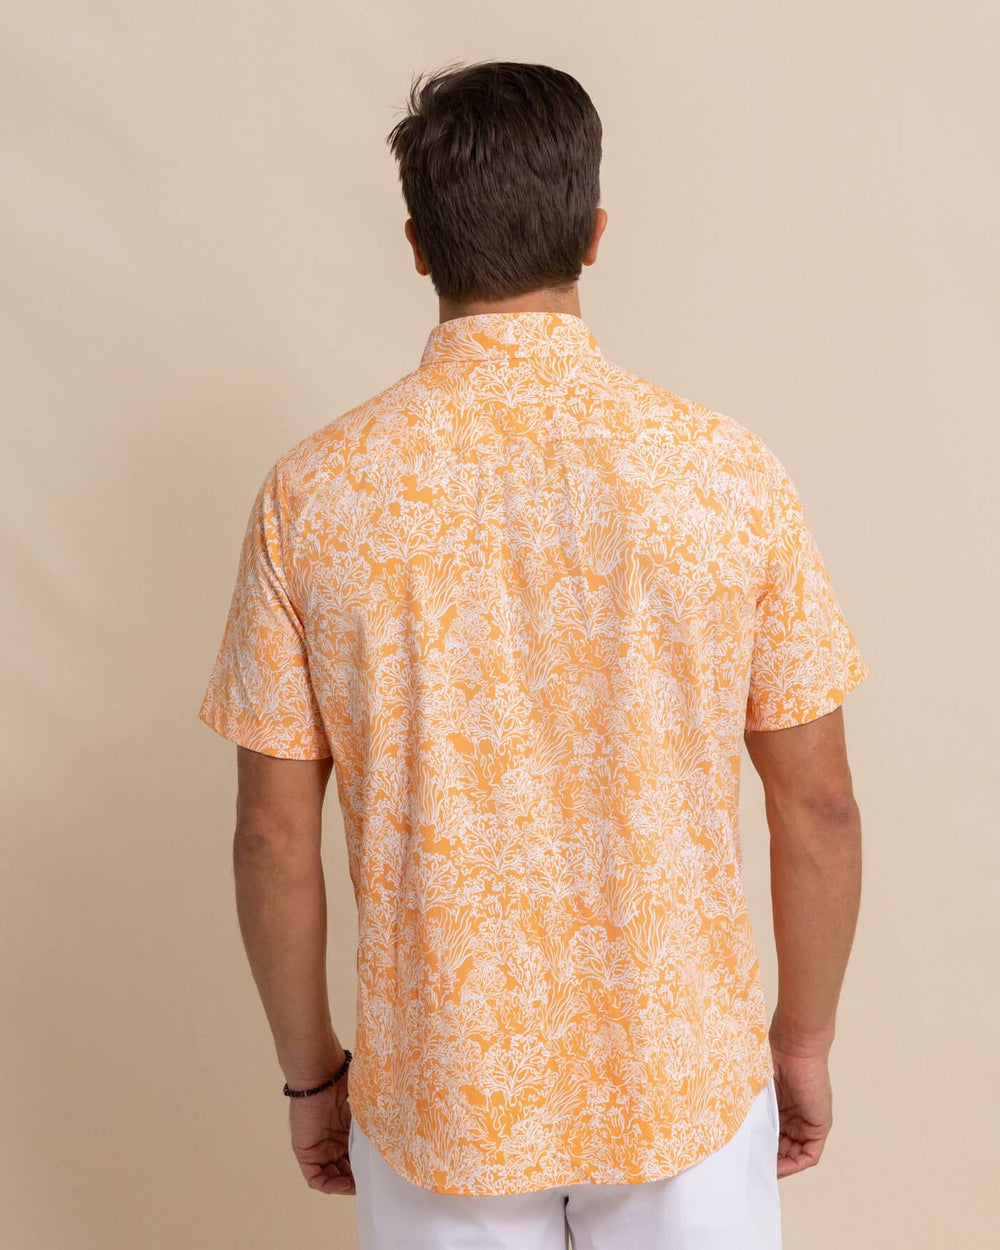 The back view of the Southern Tide Floral Coral Intercoastal Short Sleeve Sport Shirt by Southern Tide - Tangerine Orange